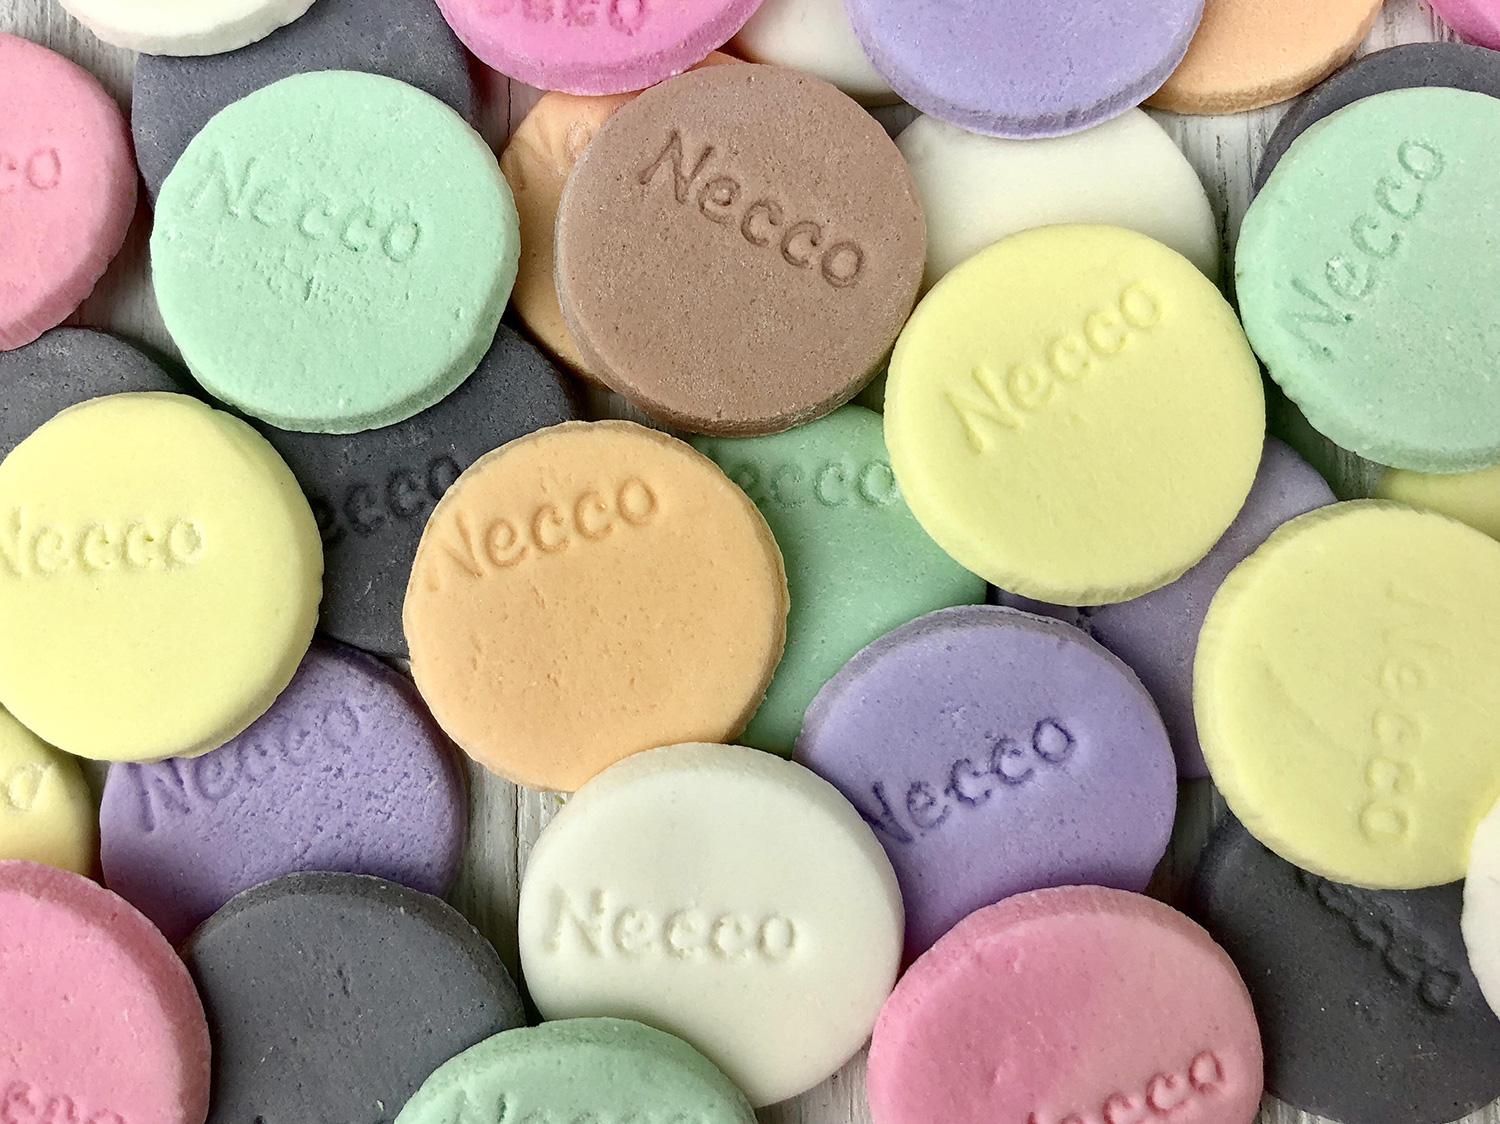 Necco Wafers Are Back!  Finally, Something Stupid To Write About